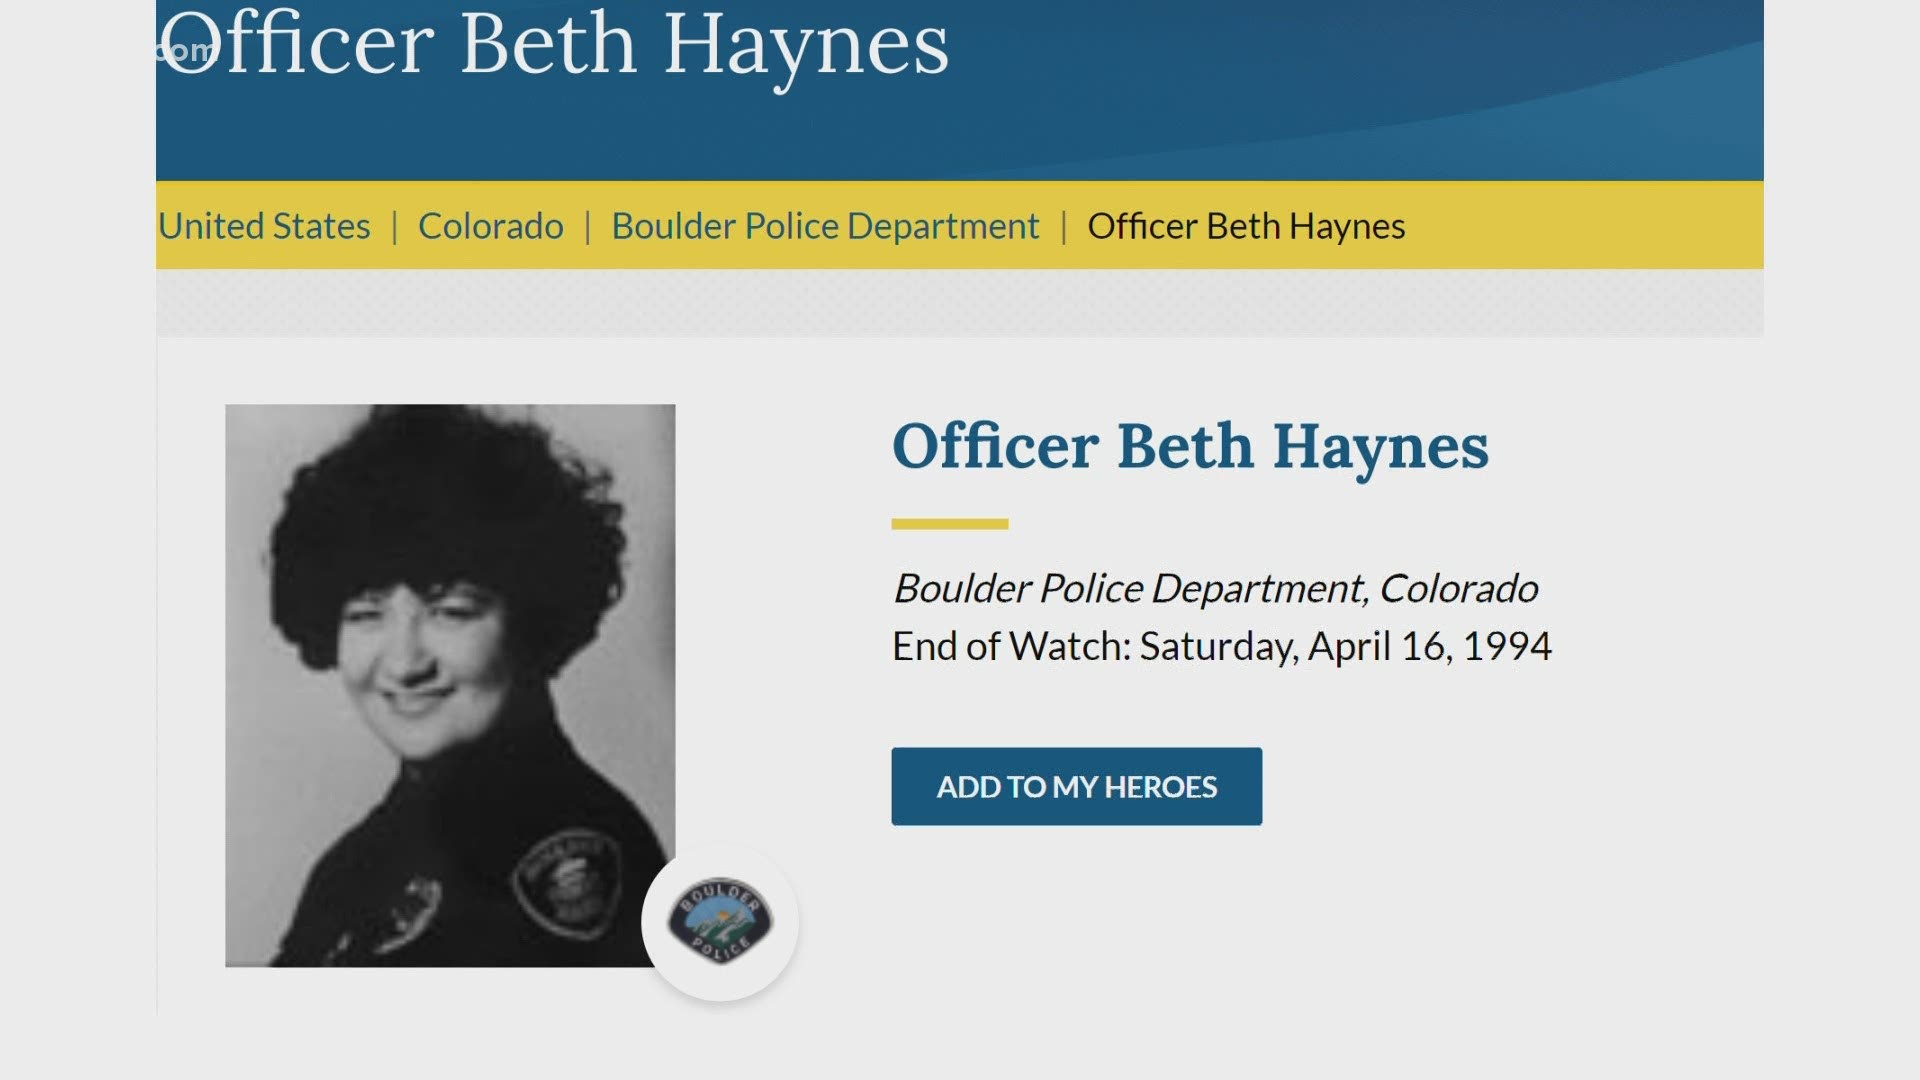 Officer Beth Haynes was shot and killed April 14, 1994. She was responding to a domestic disturbance call.